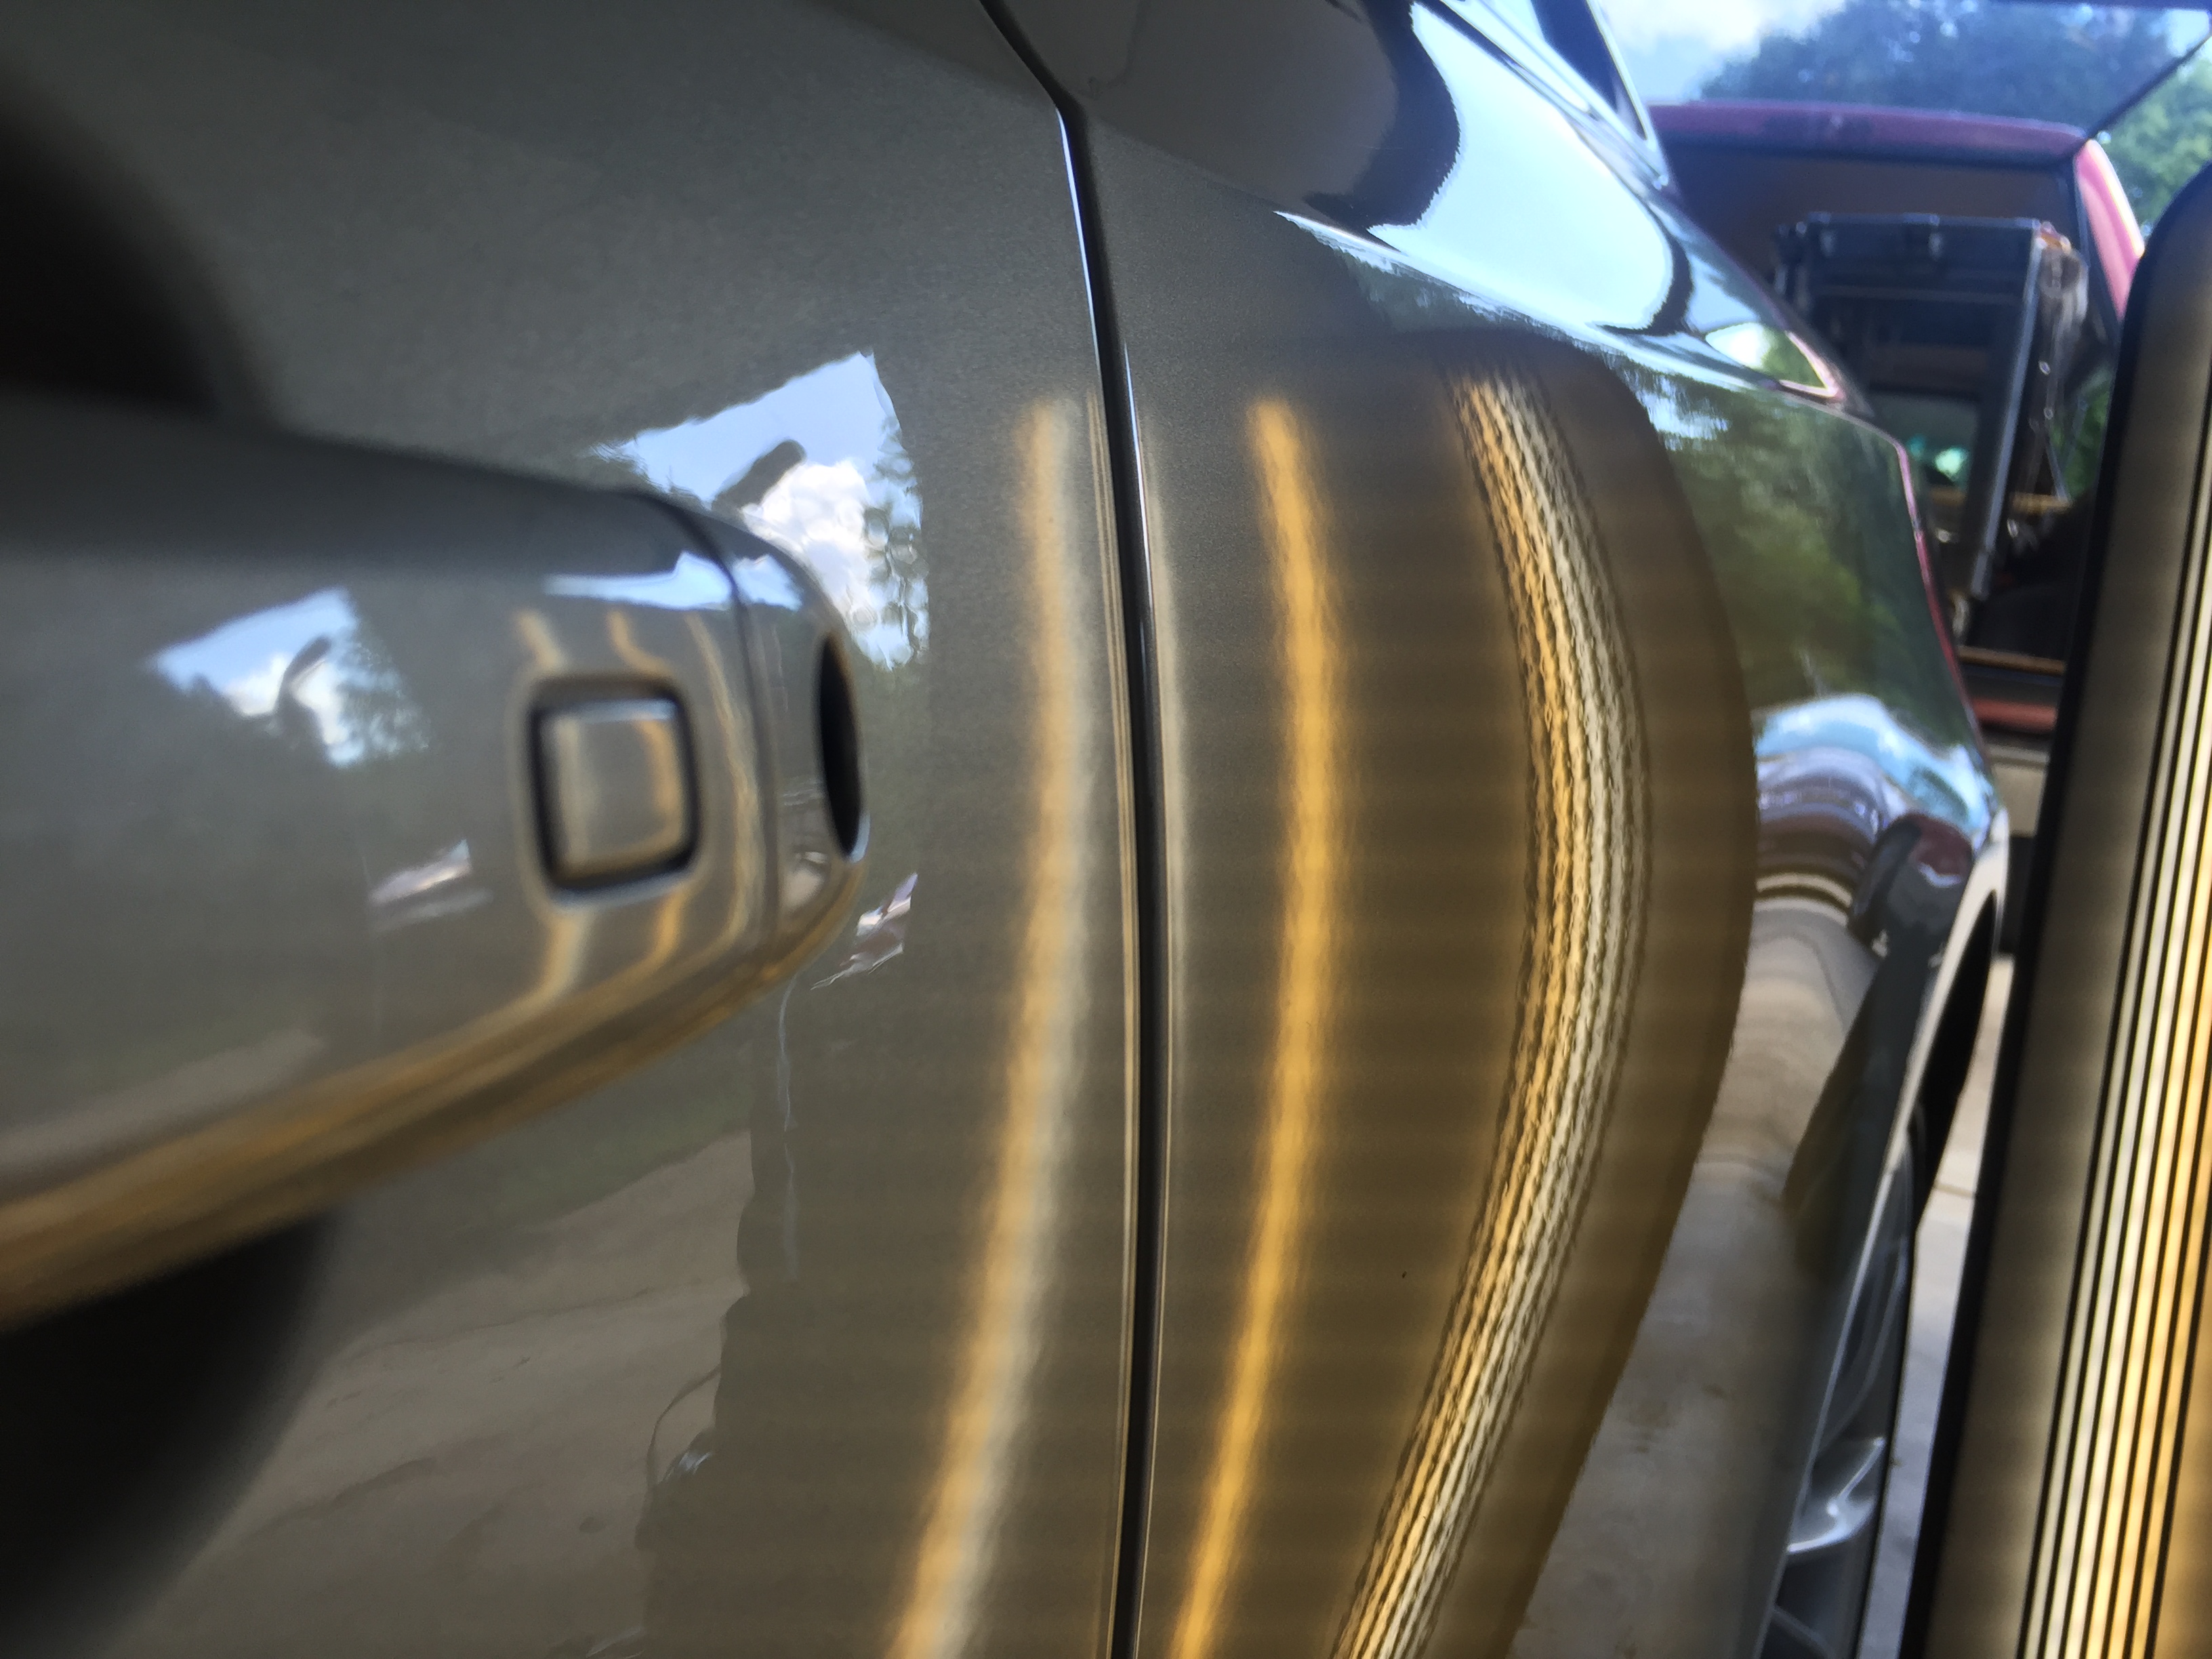 2013 Audi A5 Dent Repair on drivers rear quarter, paintless dent removal Springfield, IL https://217dent.com